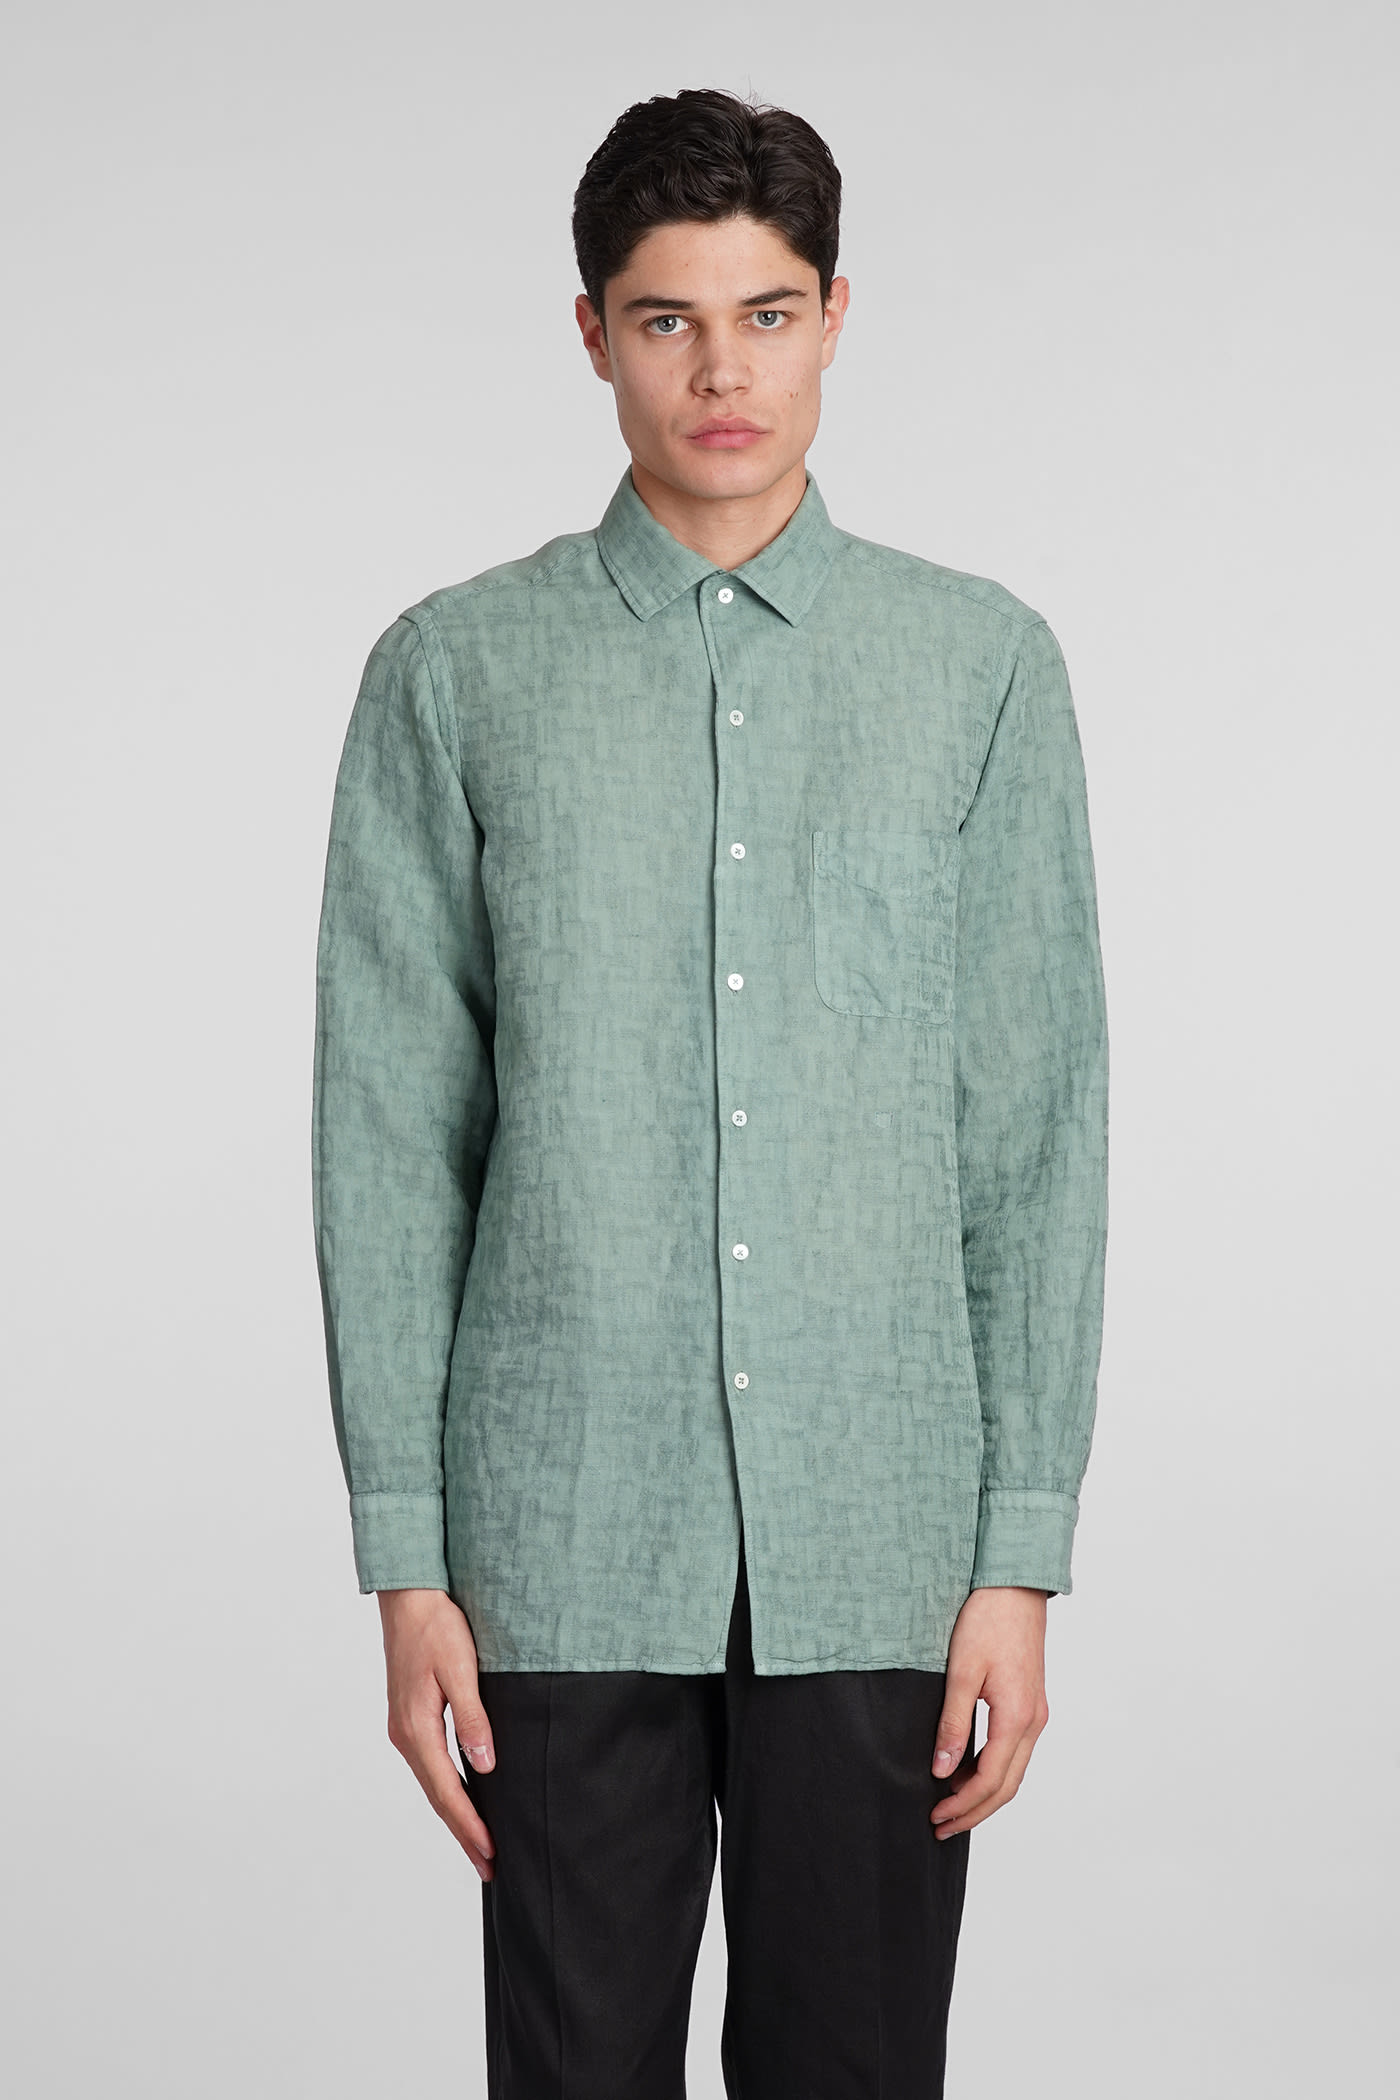 Bowles Shirt In Green Cotton